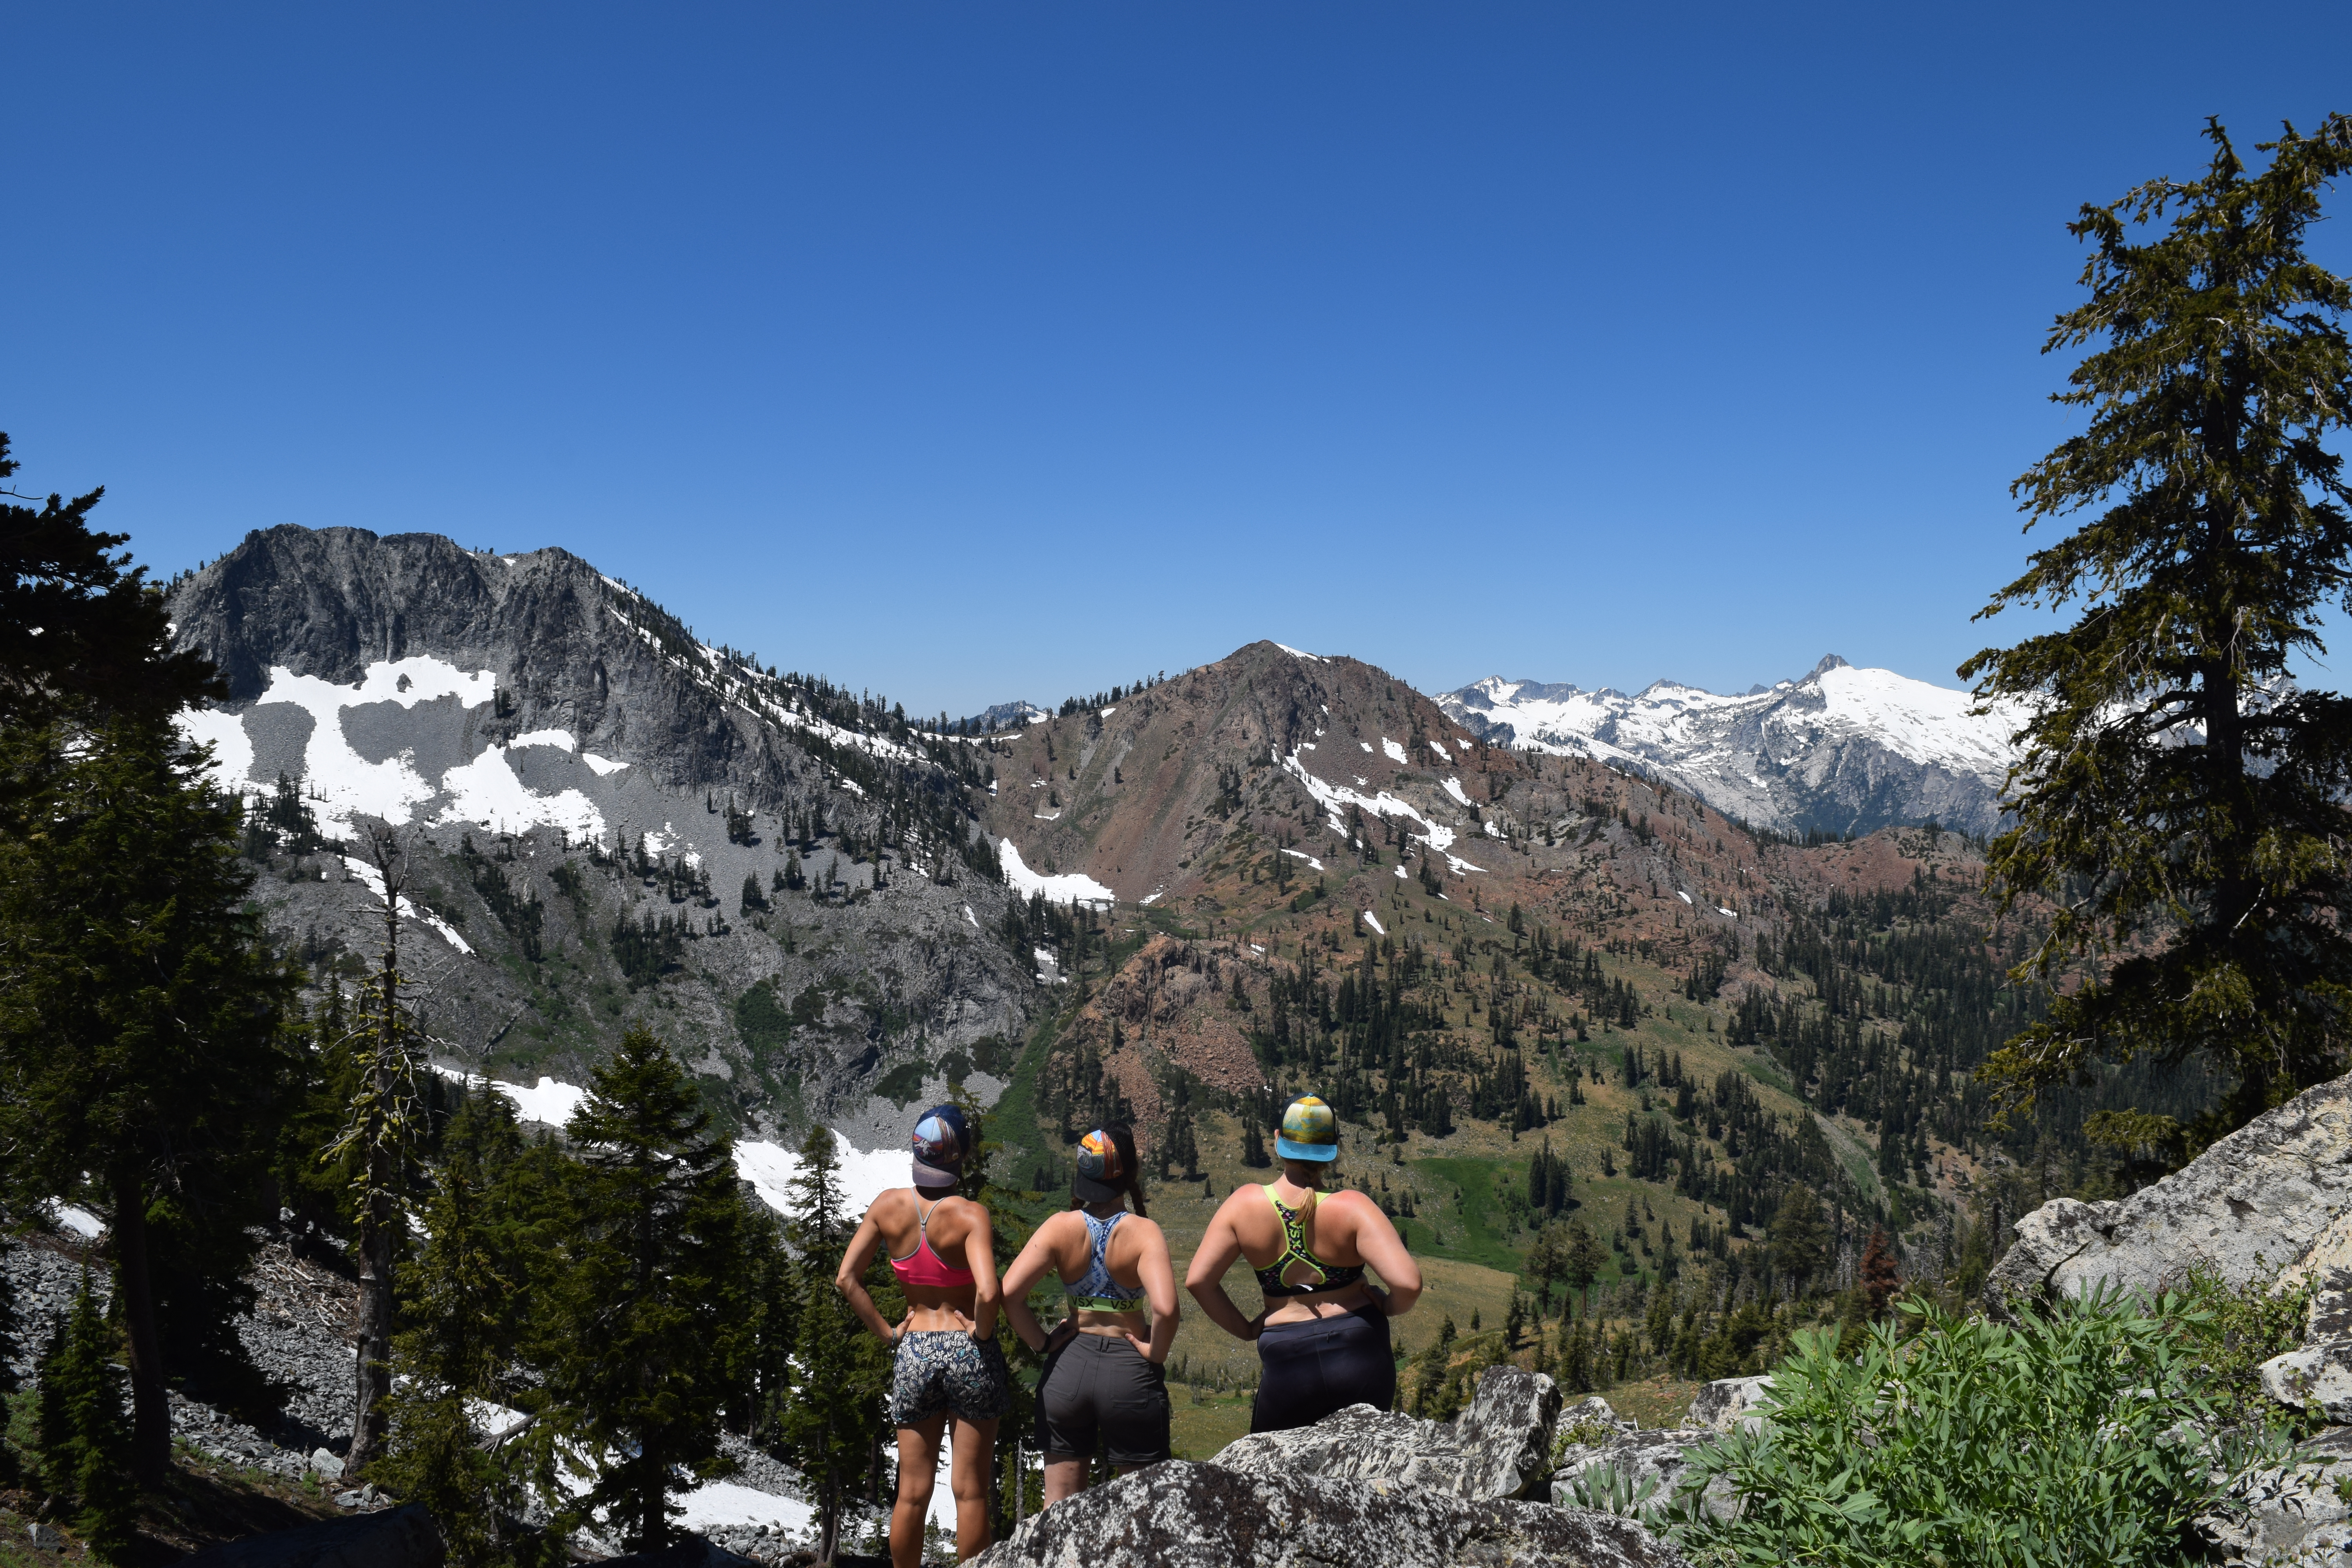 Three women in sports bras and shorts, looking out at a mountain basin whose rock types correspond very well to the above geologic map.